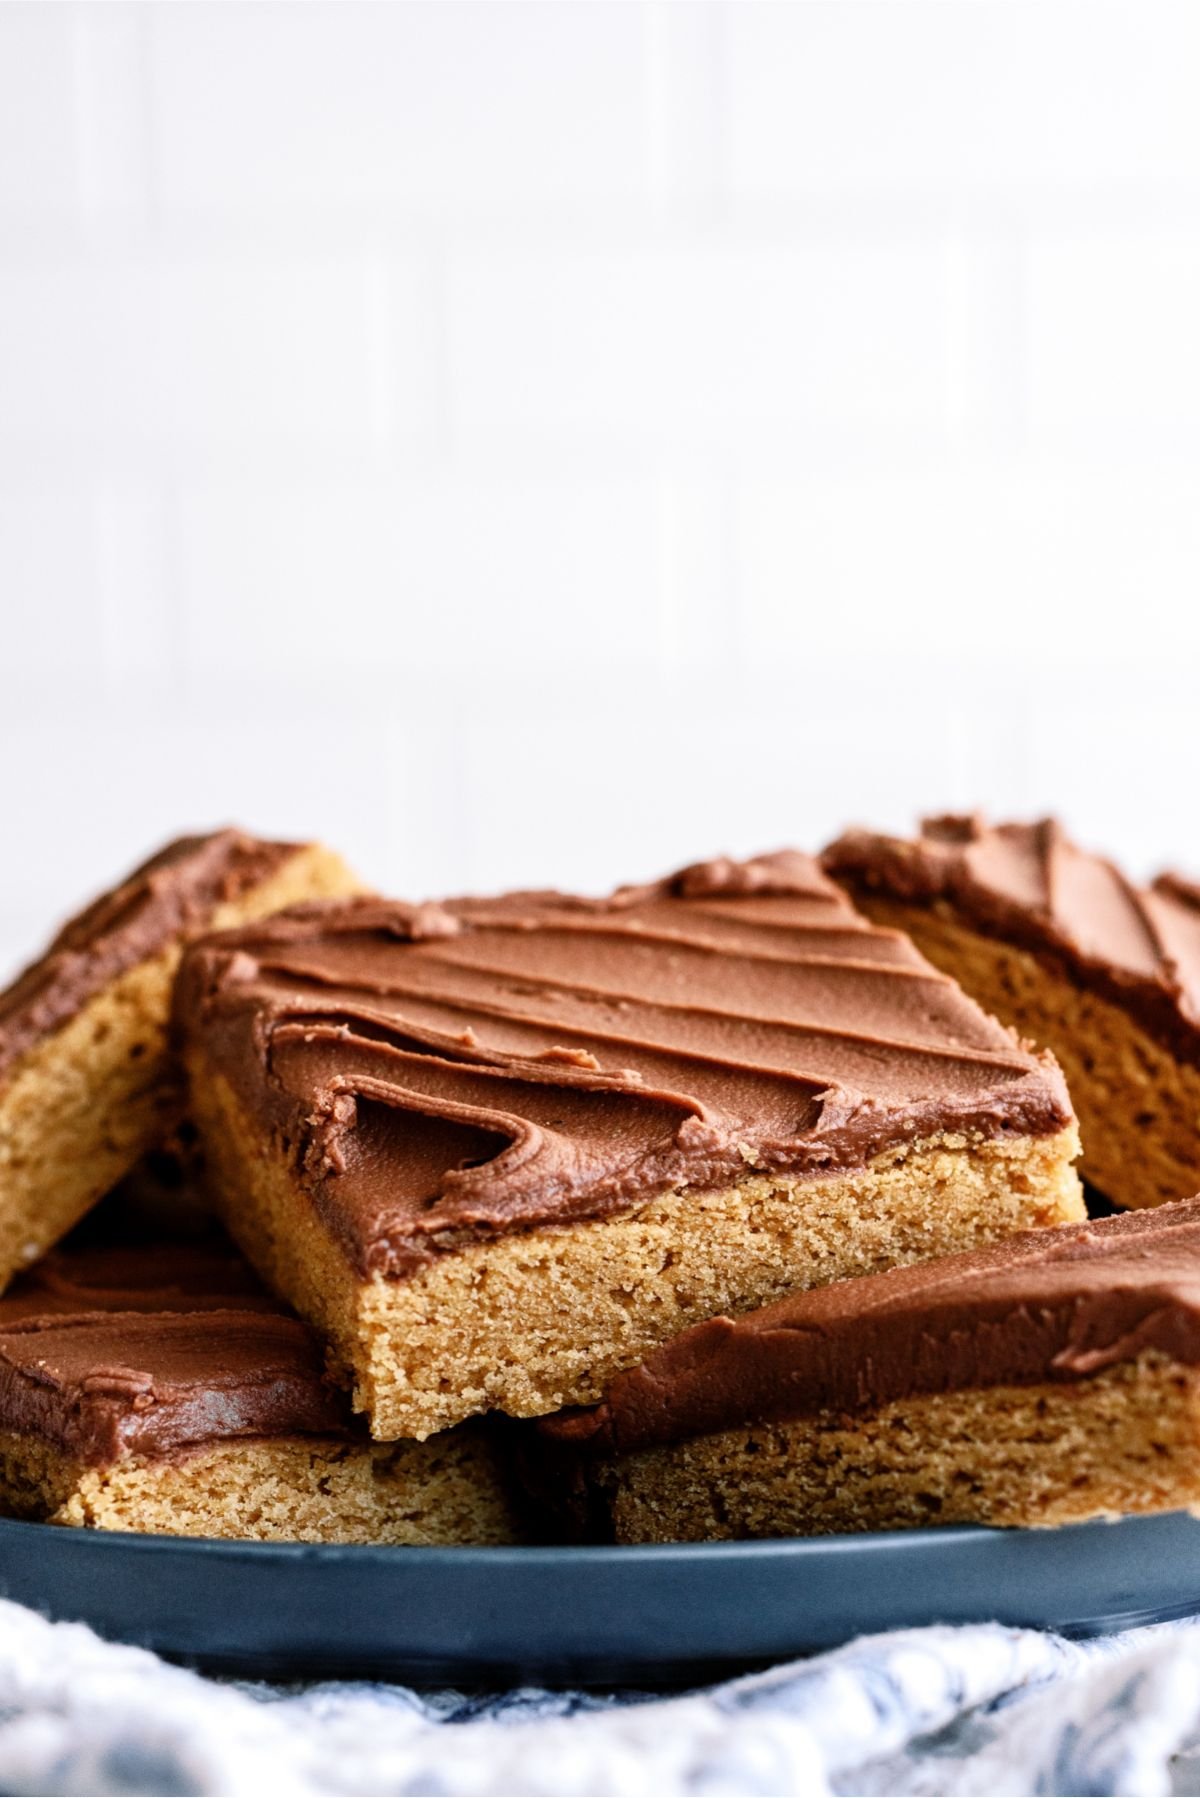 Peanut Butter and Chocolate Cake- A Doctored Cake Mix Recipe - My Cake  School